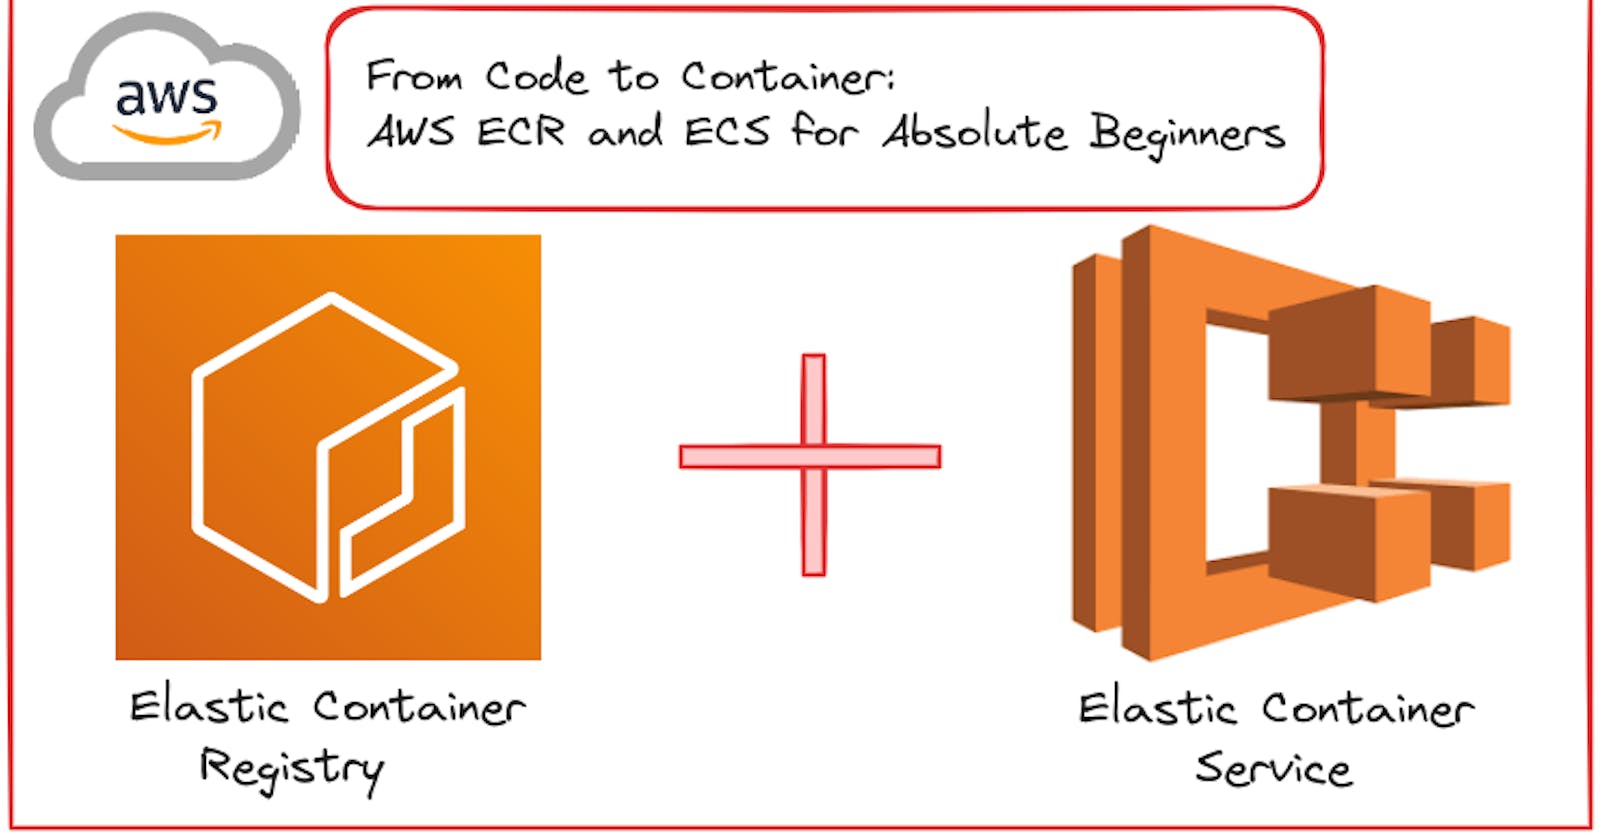 From Code to Container: AWS ECR and ECS for Absolute Beginners